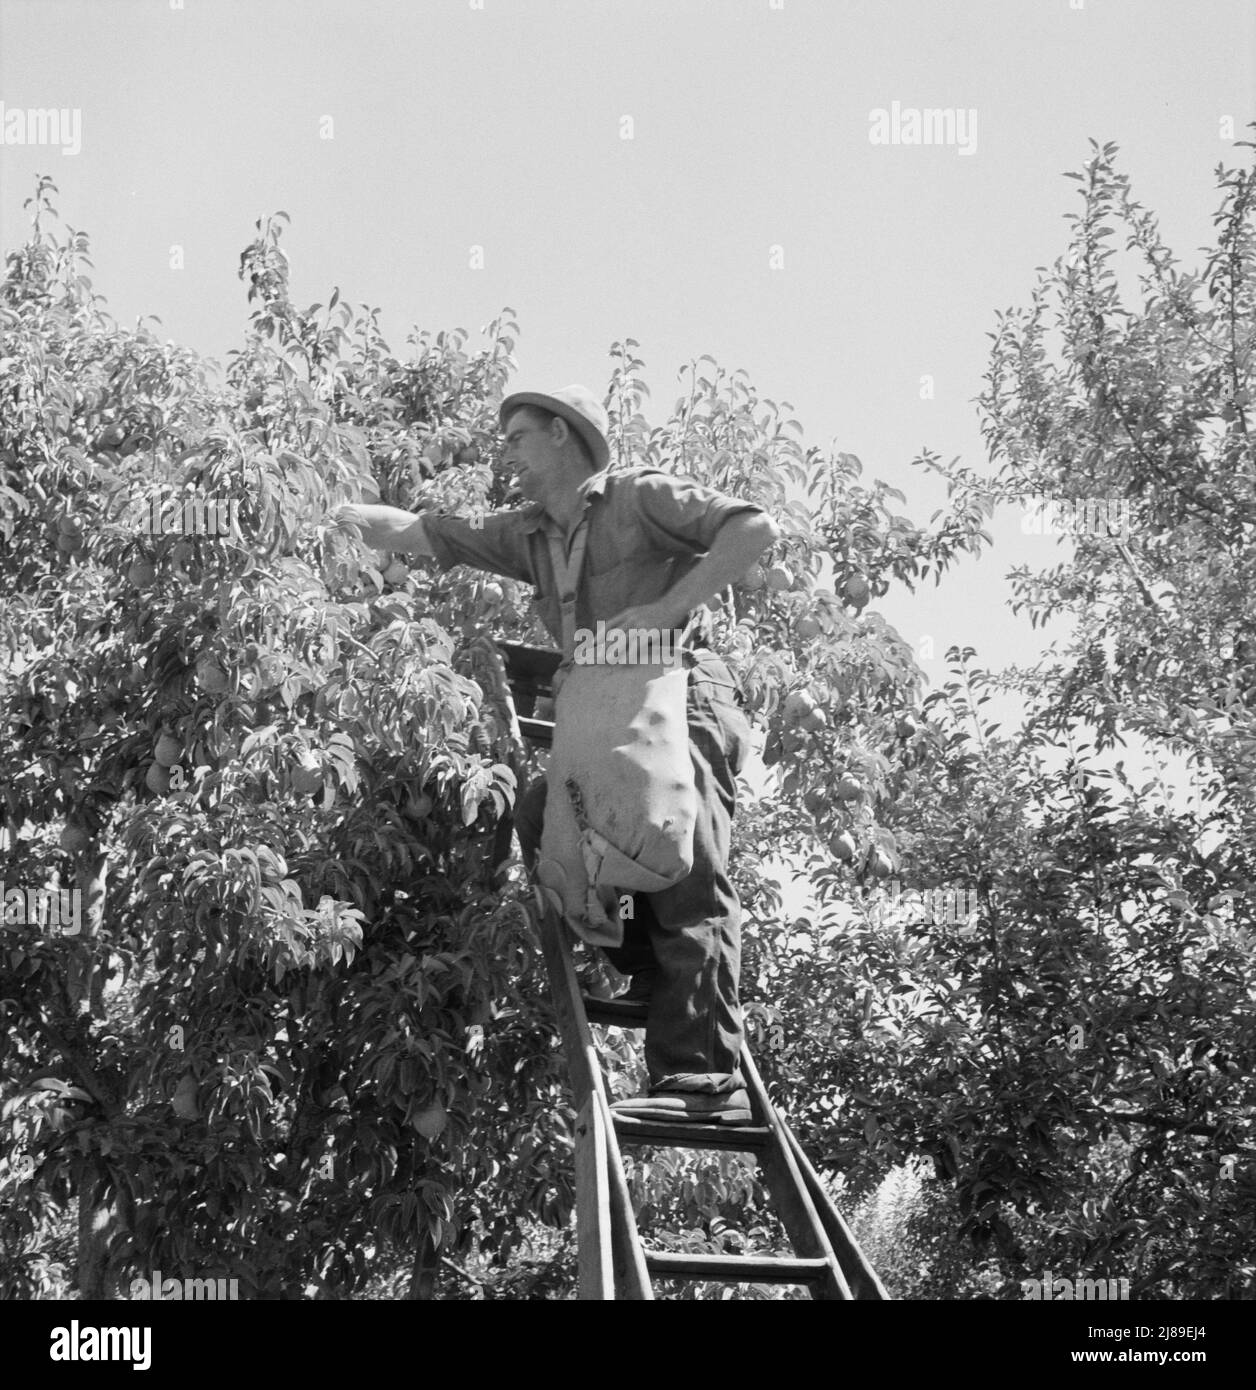 [Untitled, possibly related to: Harvesting pears, Pleasant Hill Orchards. Washington, Yakima Valley. See general caption number 34]. Stock Photo